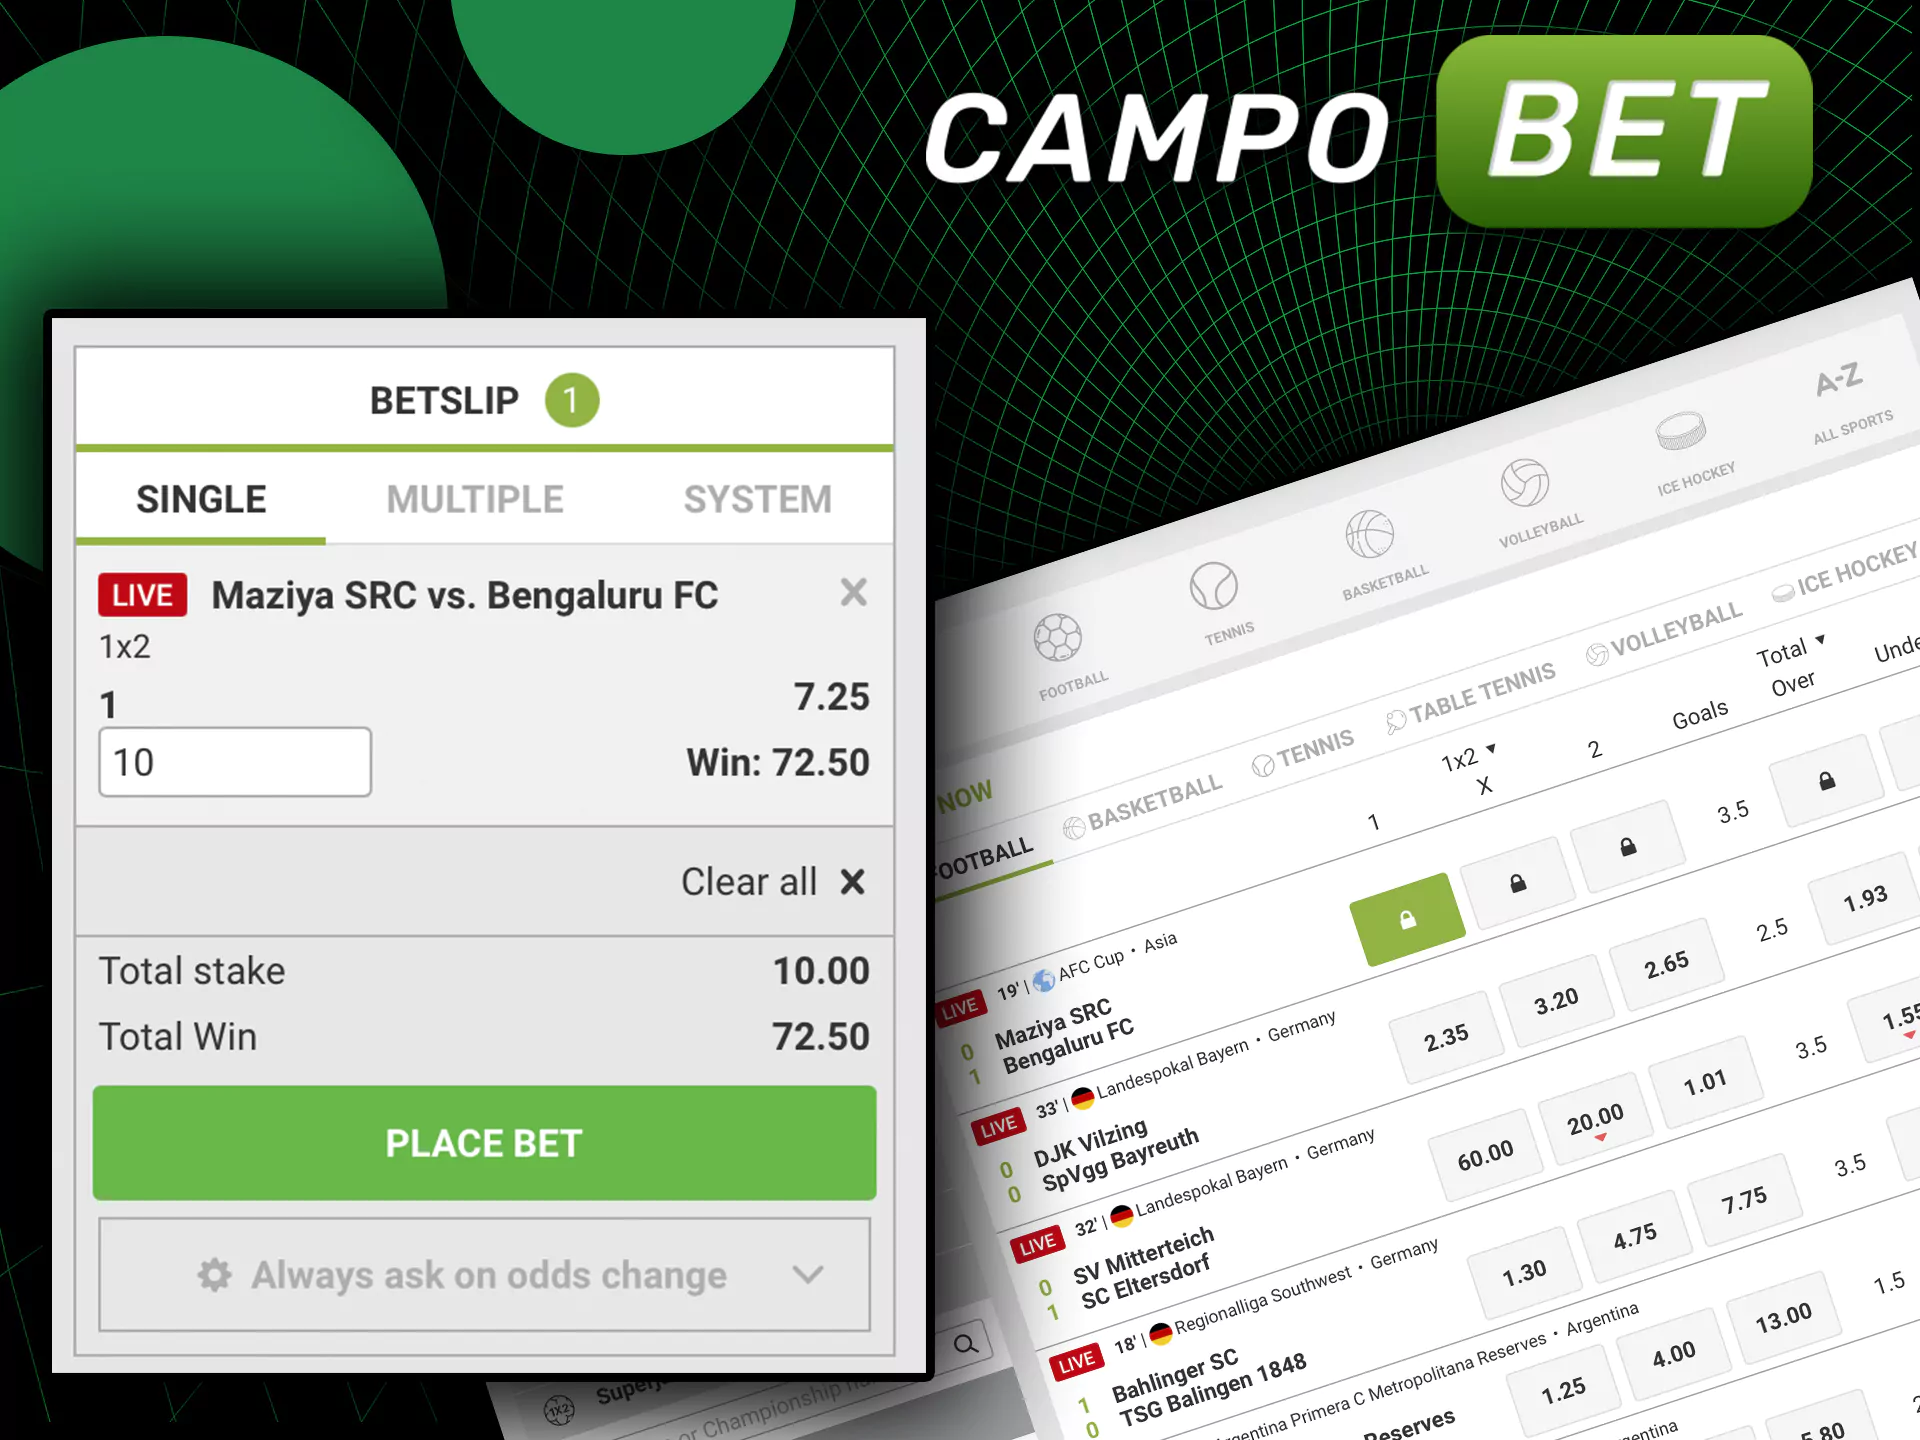 To start betting choose a sports event and analyze a match.